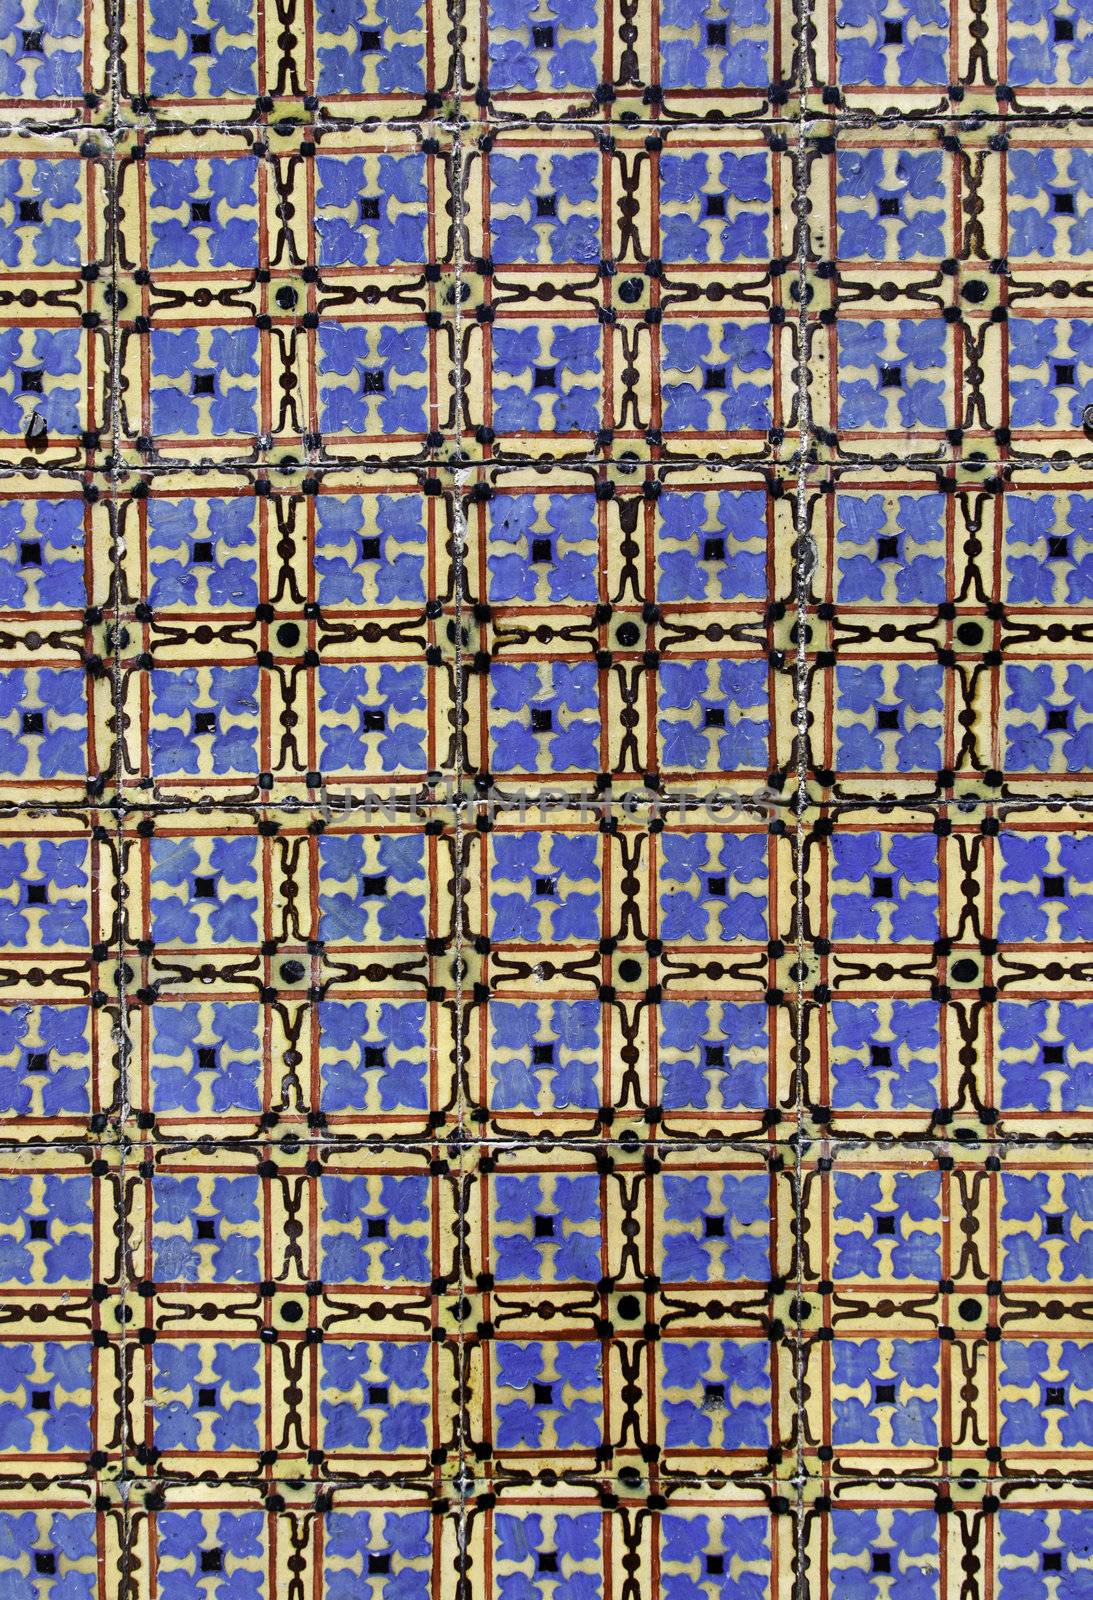 Antique tiles from Portugal, detail of a wall in the city of Braga